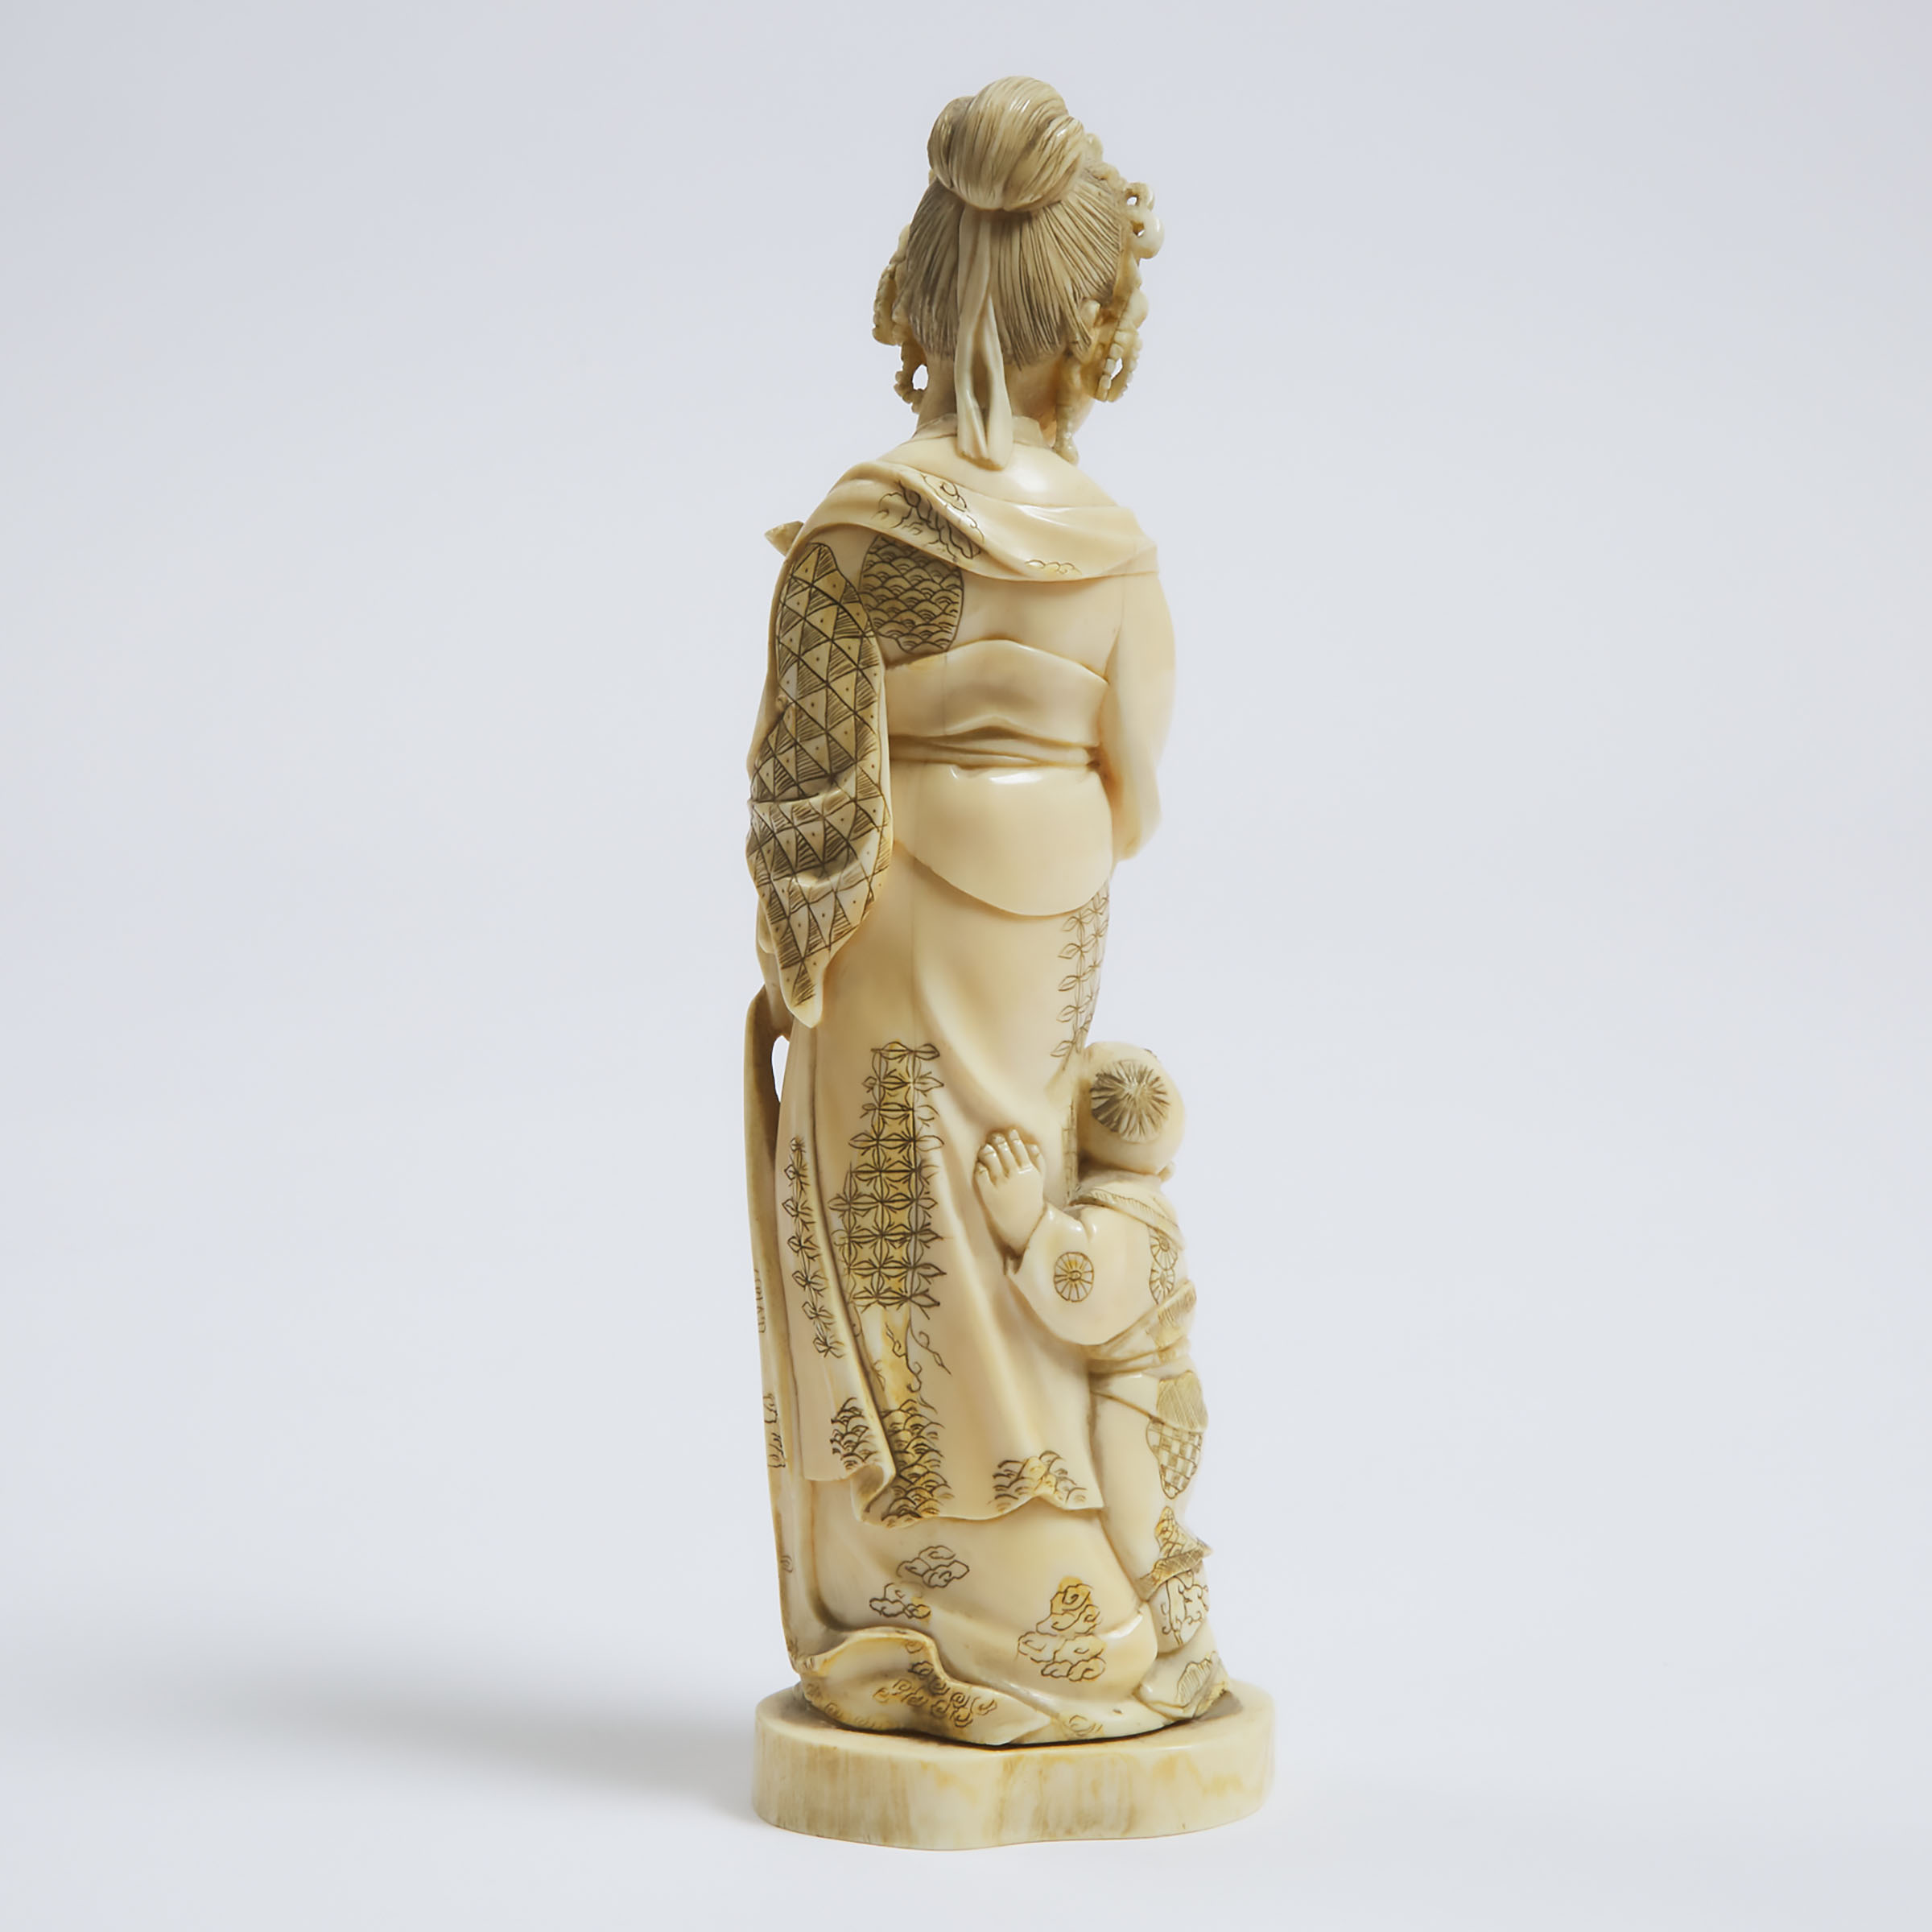 A Carved Ivory Group of a Lady and Child, Signed Gyokushi, Meiji Period (1868-1912)